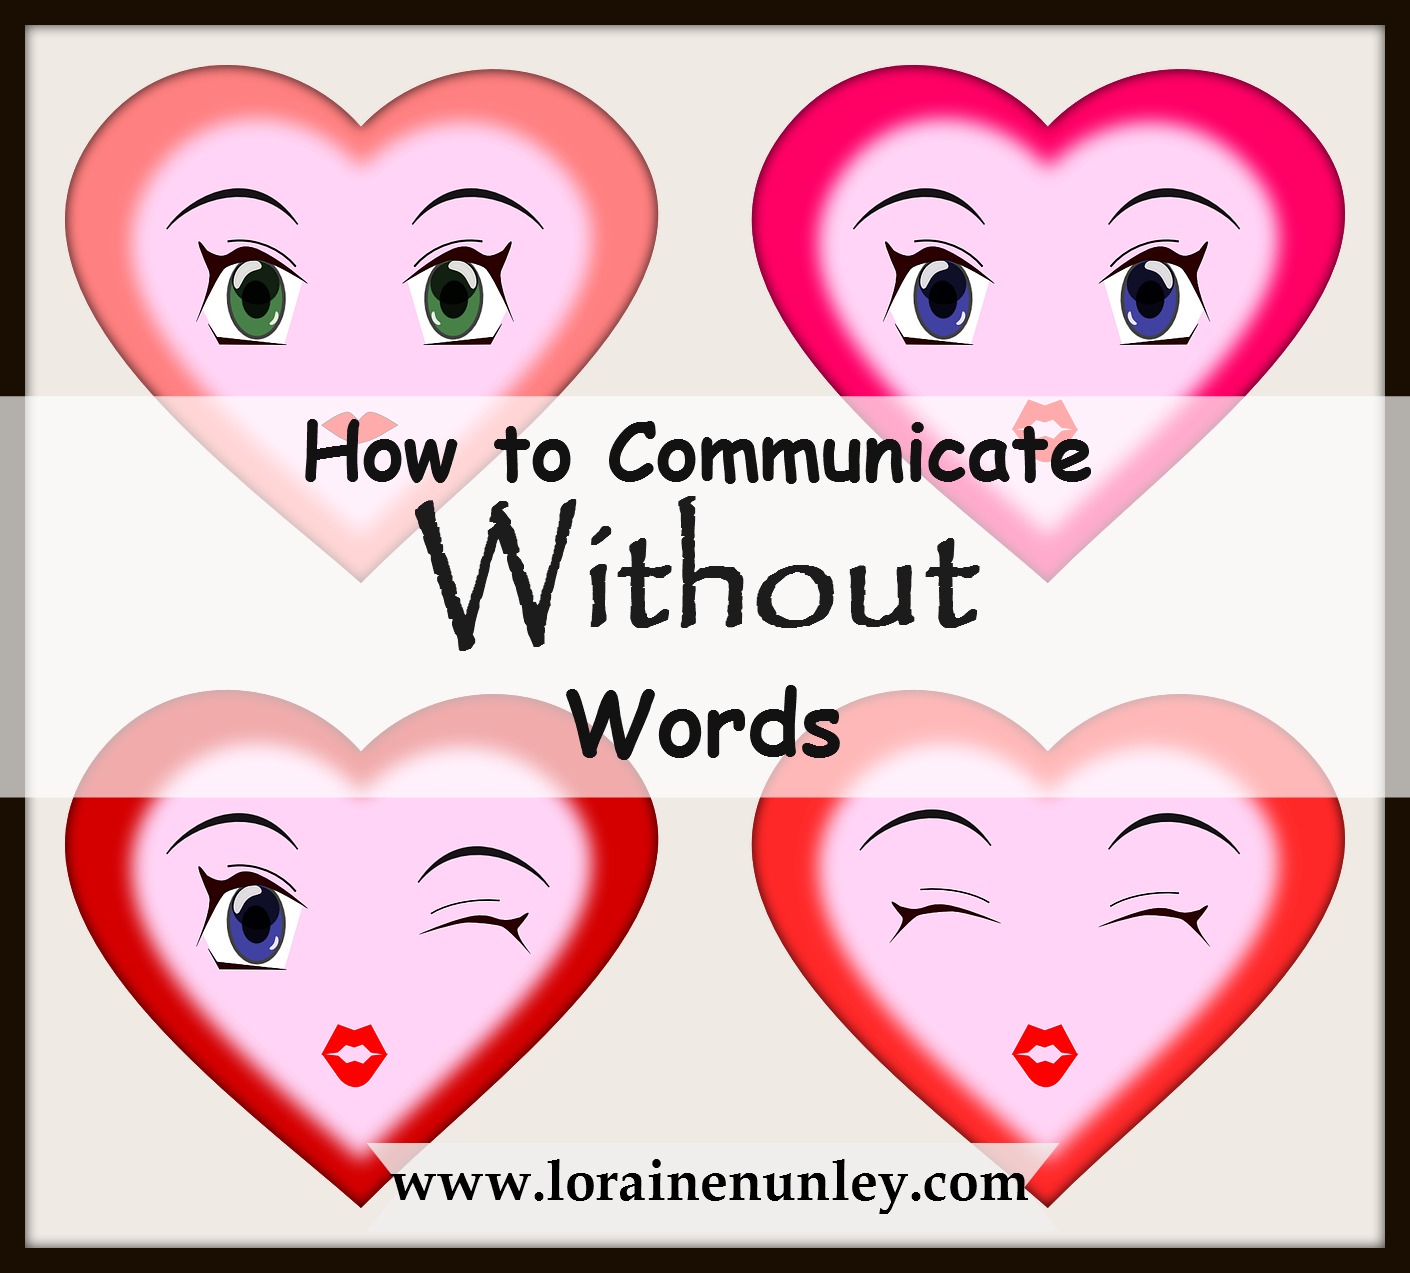 How to Communicate without Words